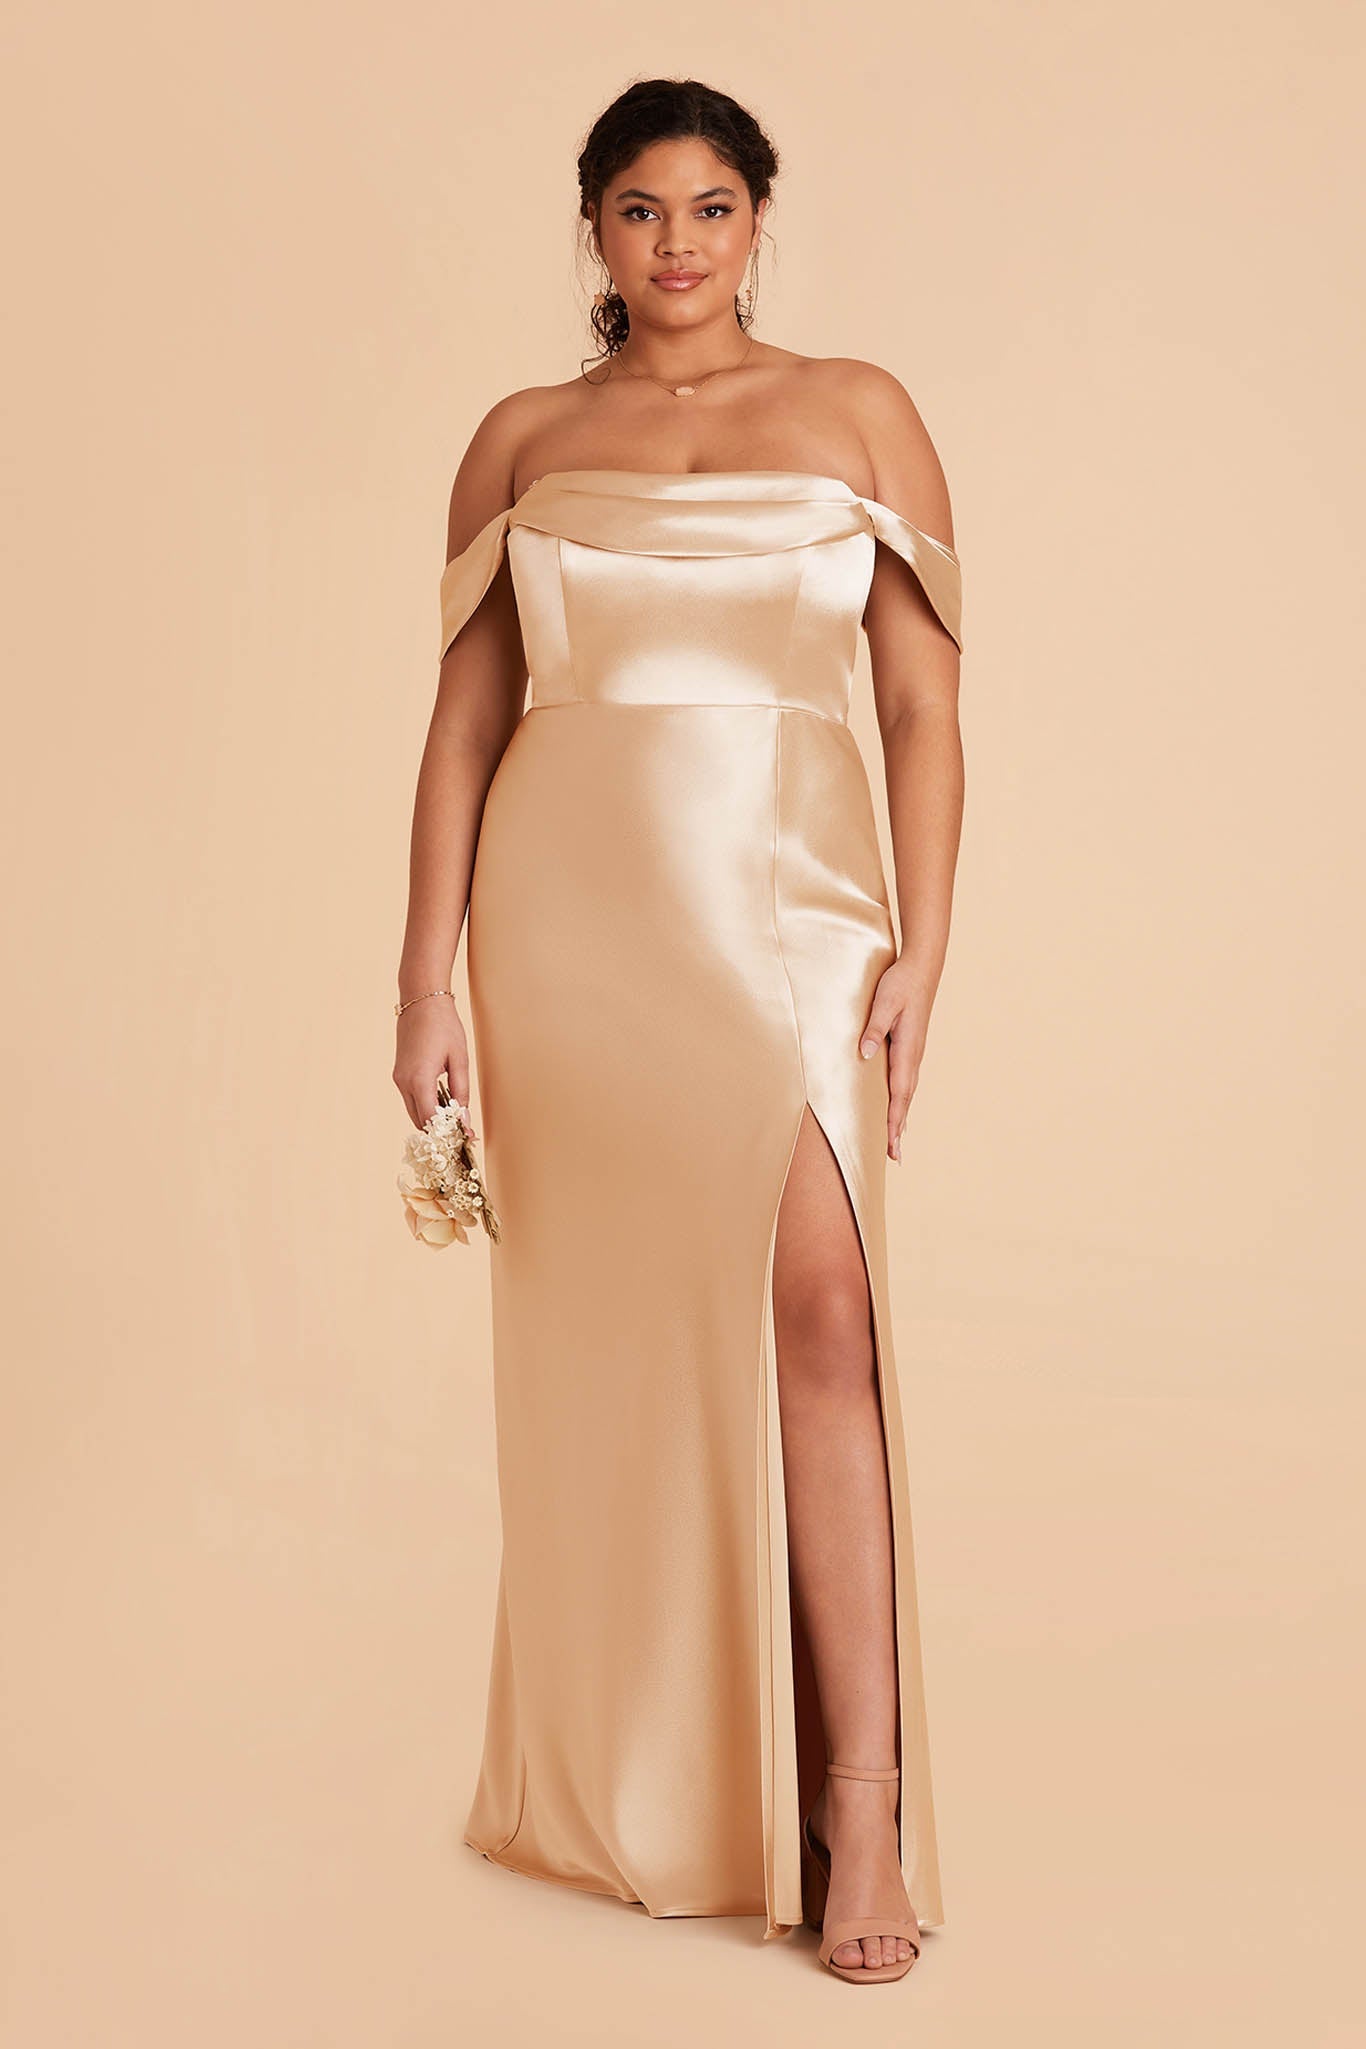 Ways To Love You Convertible Dress (Gold)